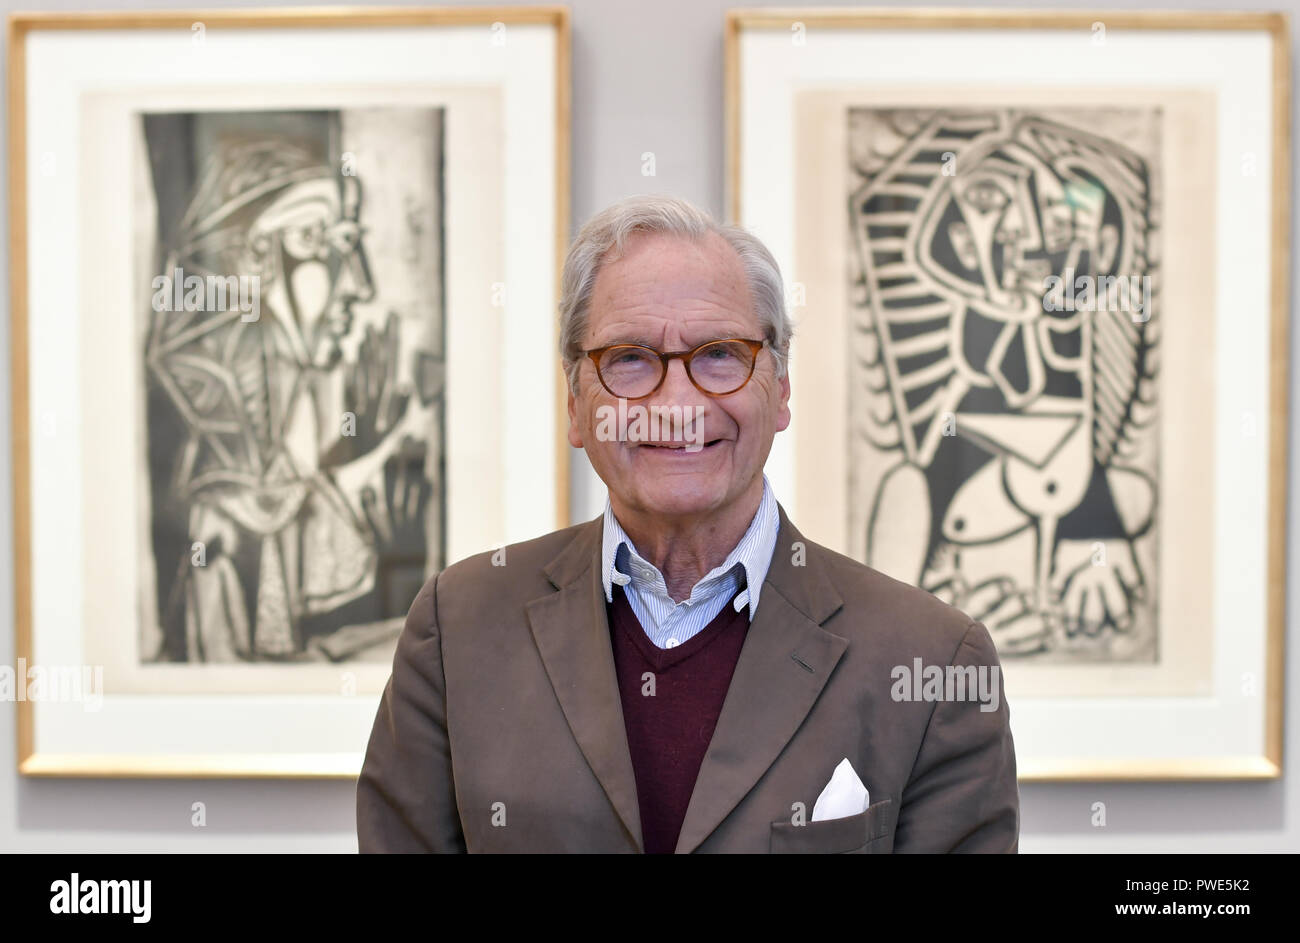 09 October 2018, Berlin: The art collector Bernd Schultz stands in front of a part of his collection in the Villa Griesebach. This is 'La femme à la fenêtre' (l) 'L'Égyptienne' by Pablo Picasso. The art dealer Bernd Schultz sells his private collection for the founding of an Exilmuseum in Berlin. (to dpa-KORR ''All my children' - art collection for NS-Exilmuseum zur Auktion' from 16.10.2018) Photo: Jens Kalaene/dpa Stock Photo